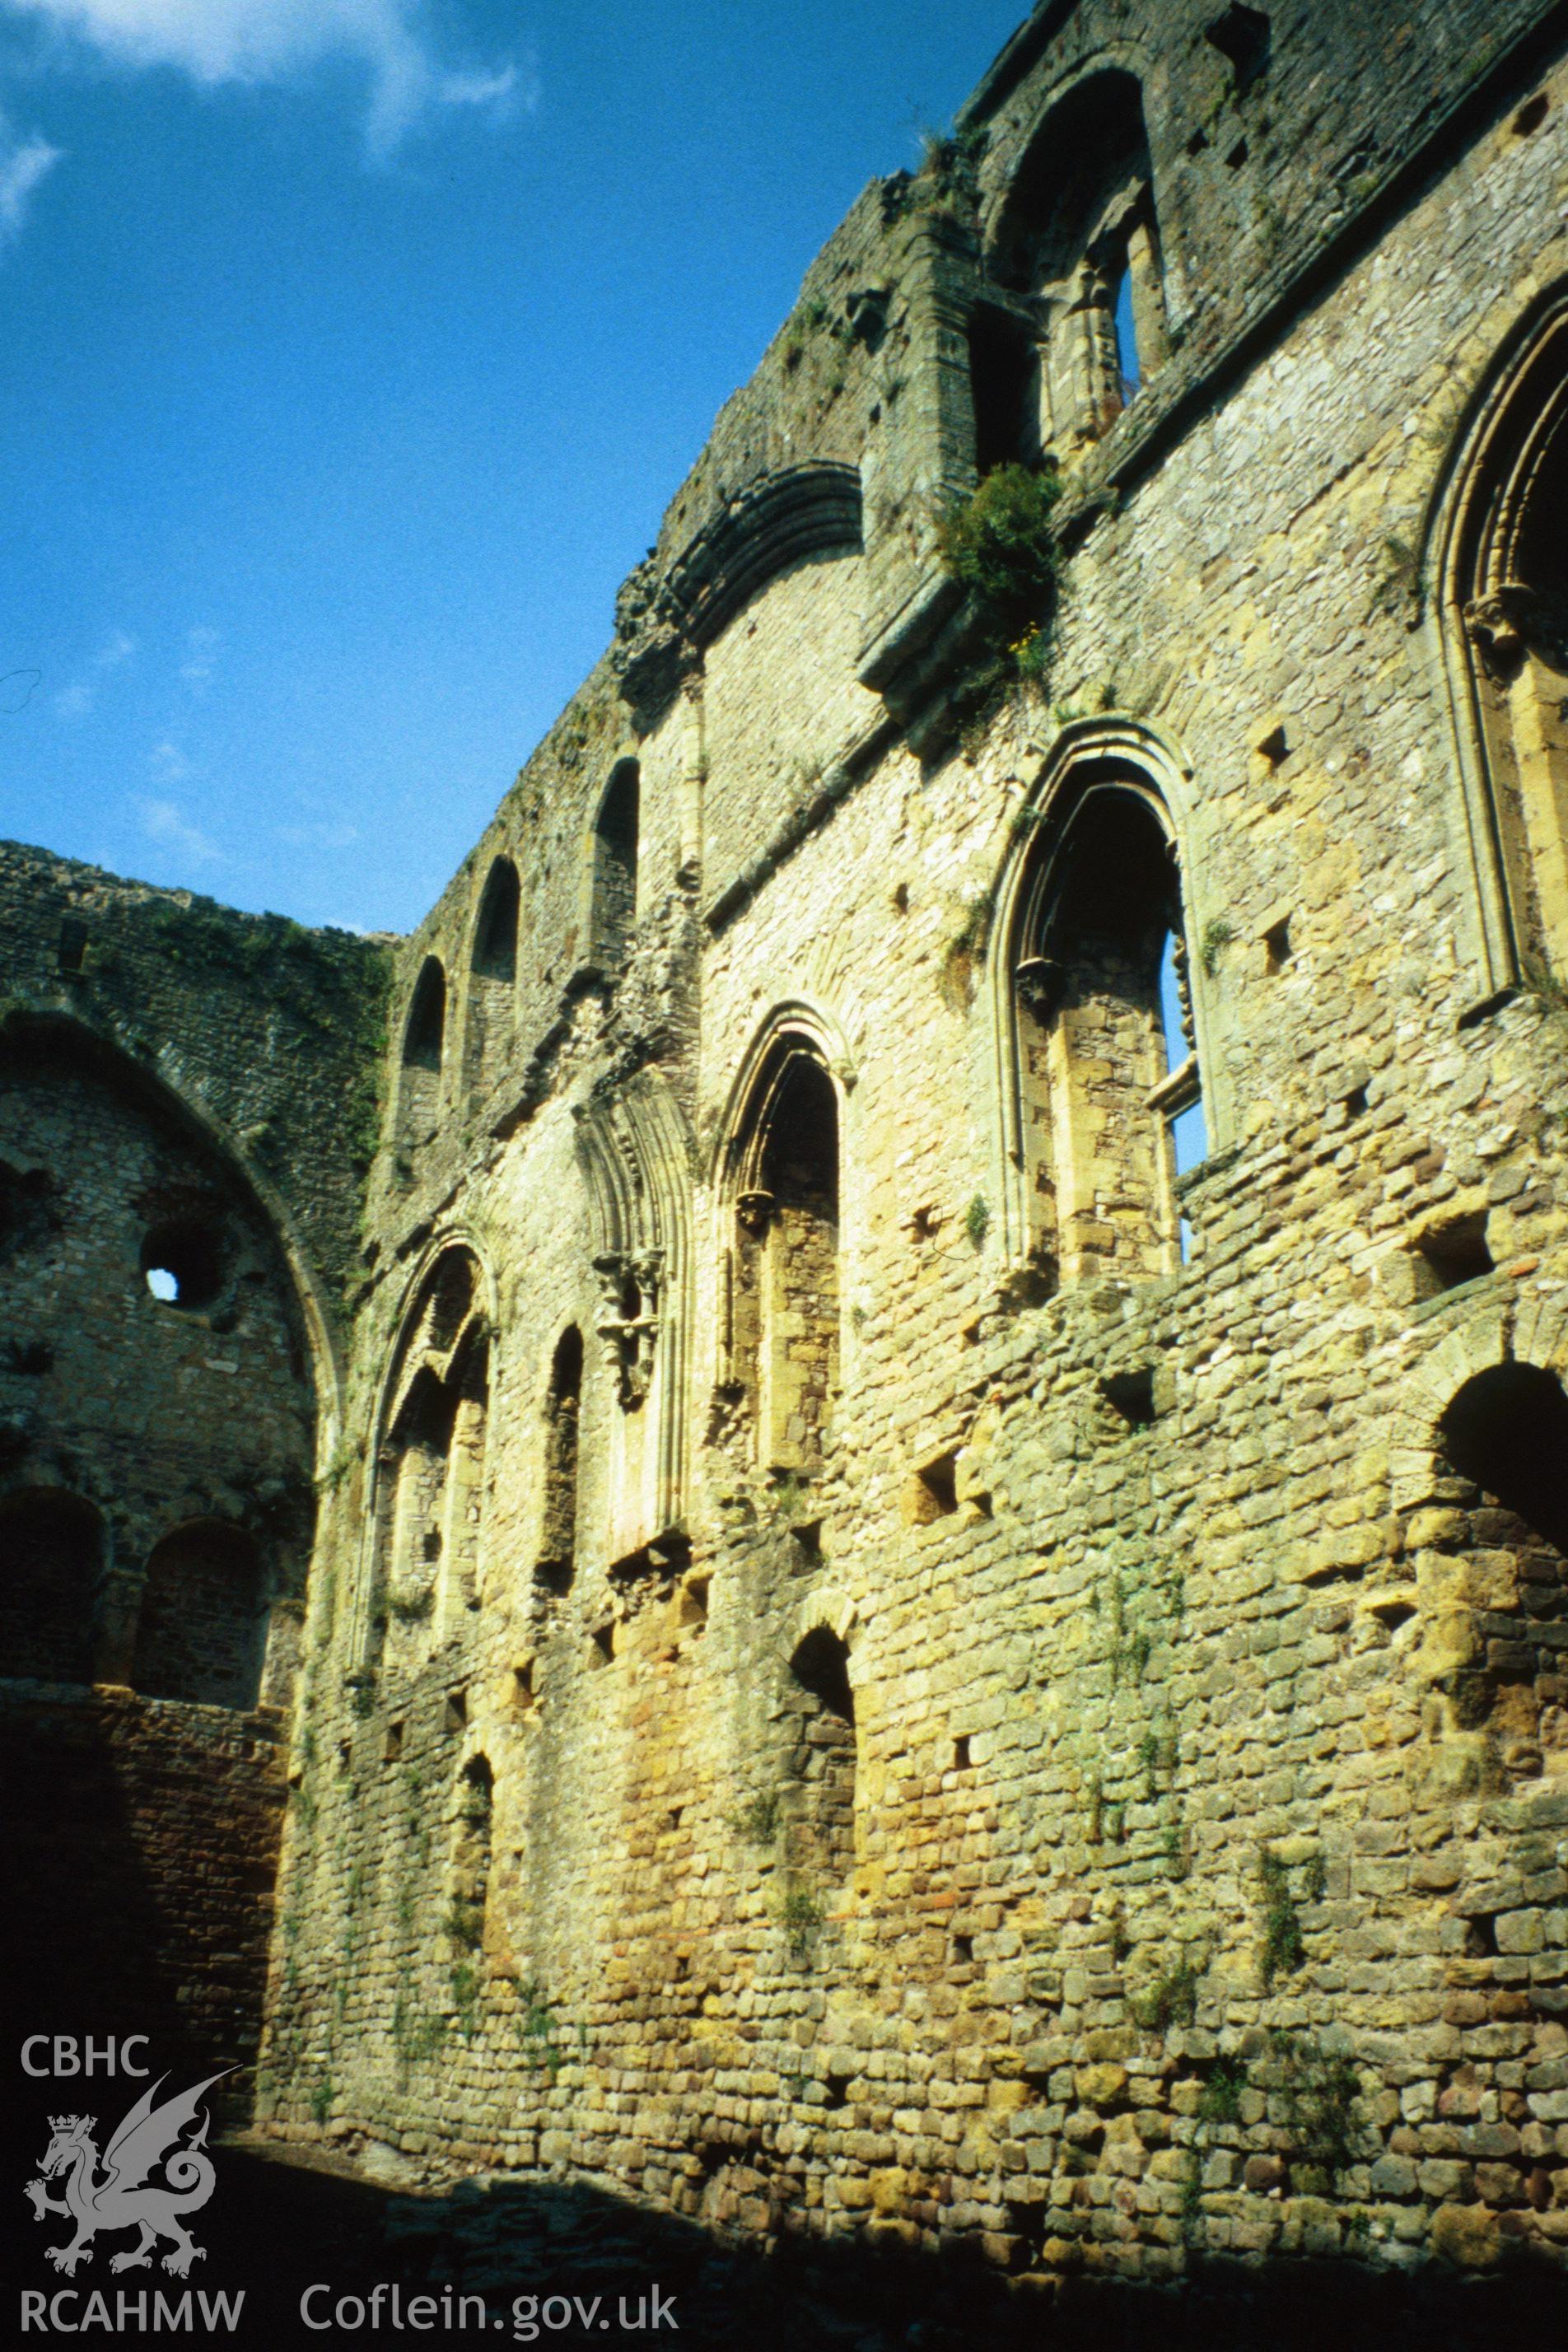 Interior of the Great Tower looking north-east.